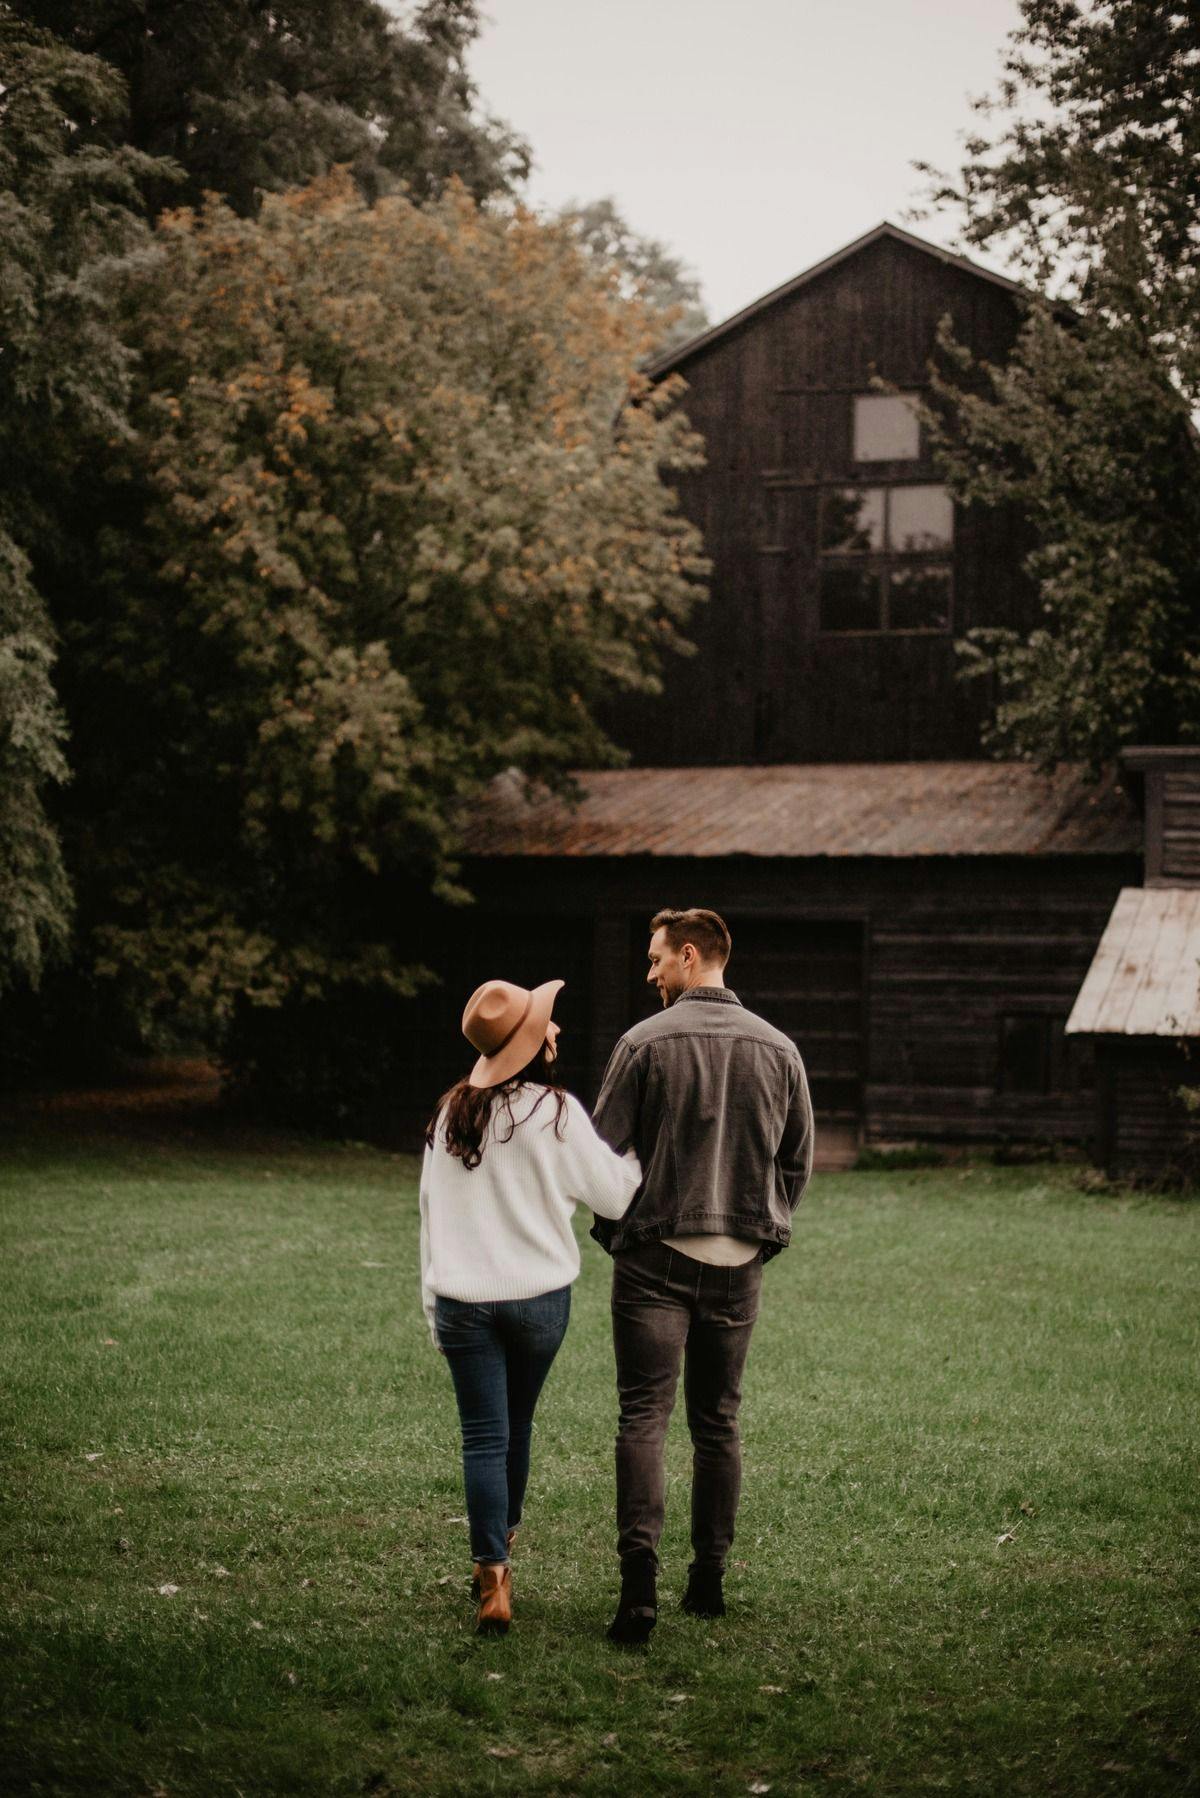 A male and female couple arm in arm walking toward a stylish barn in the forest